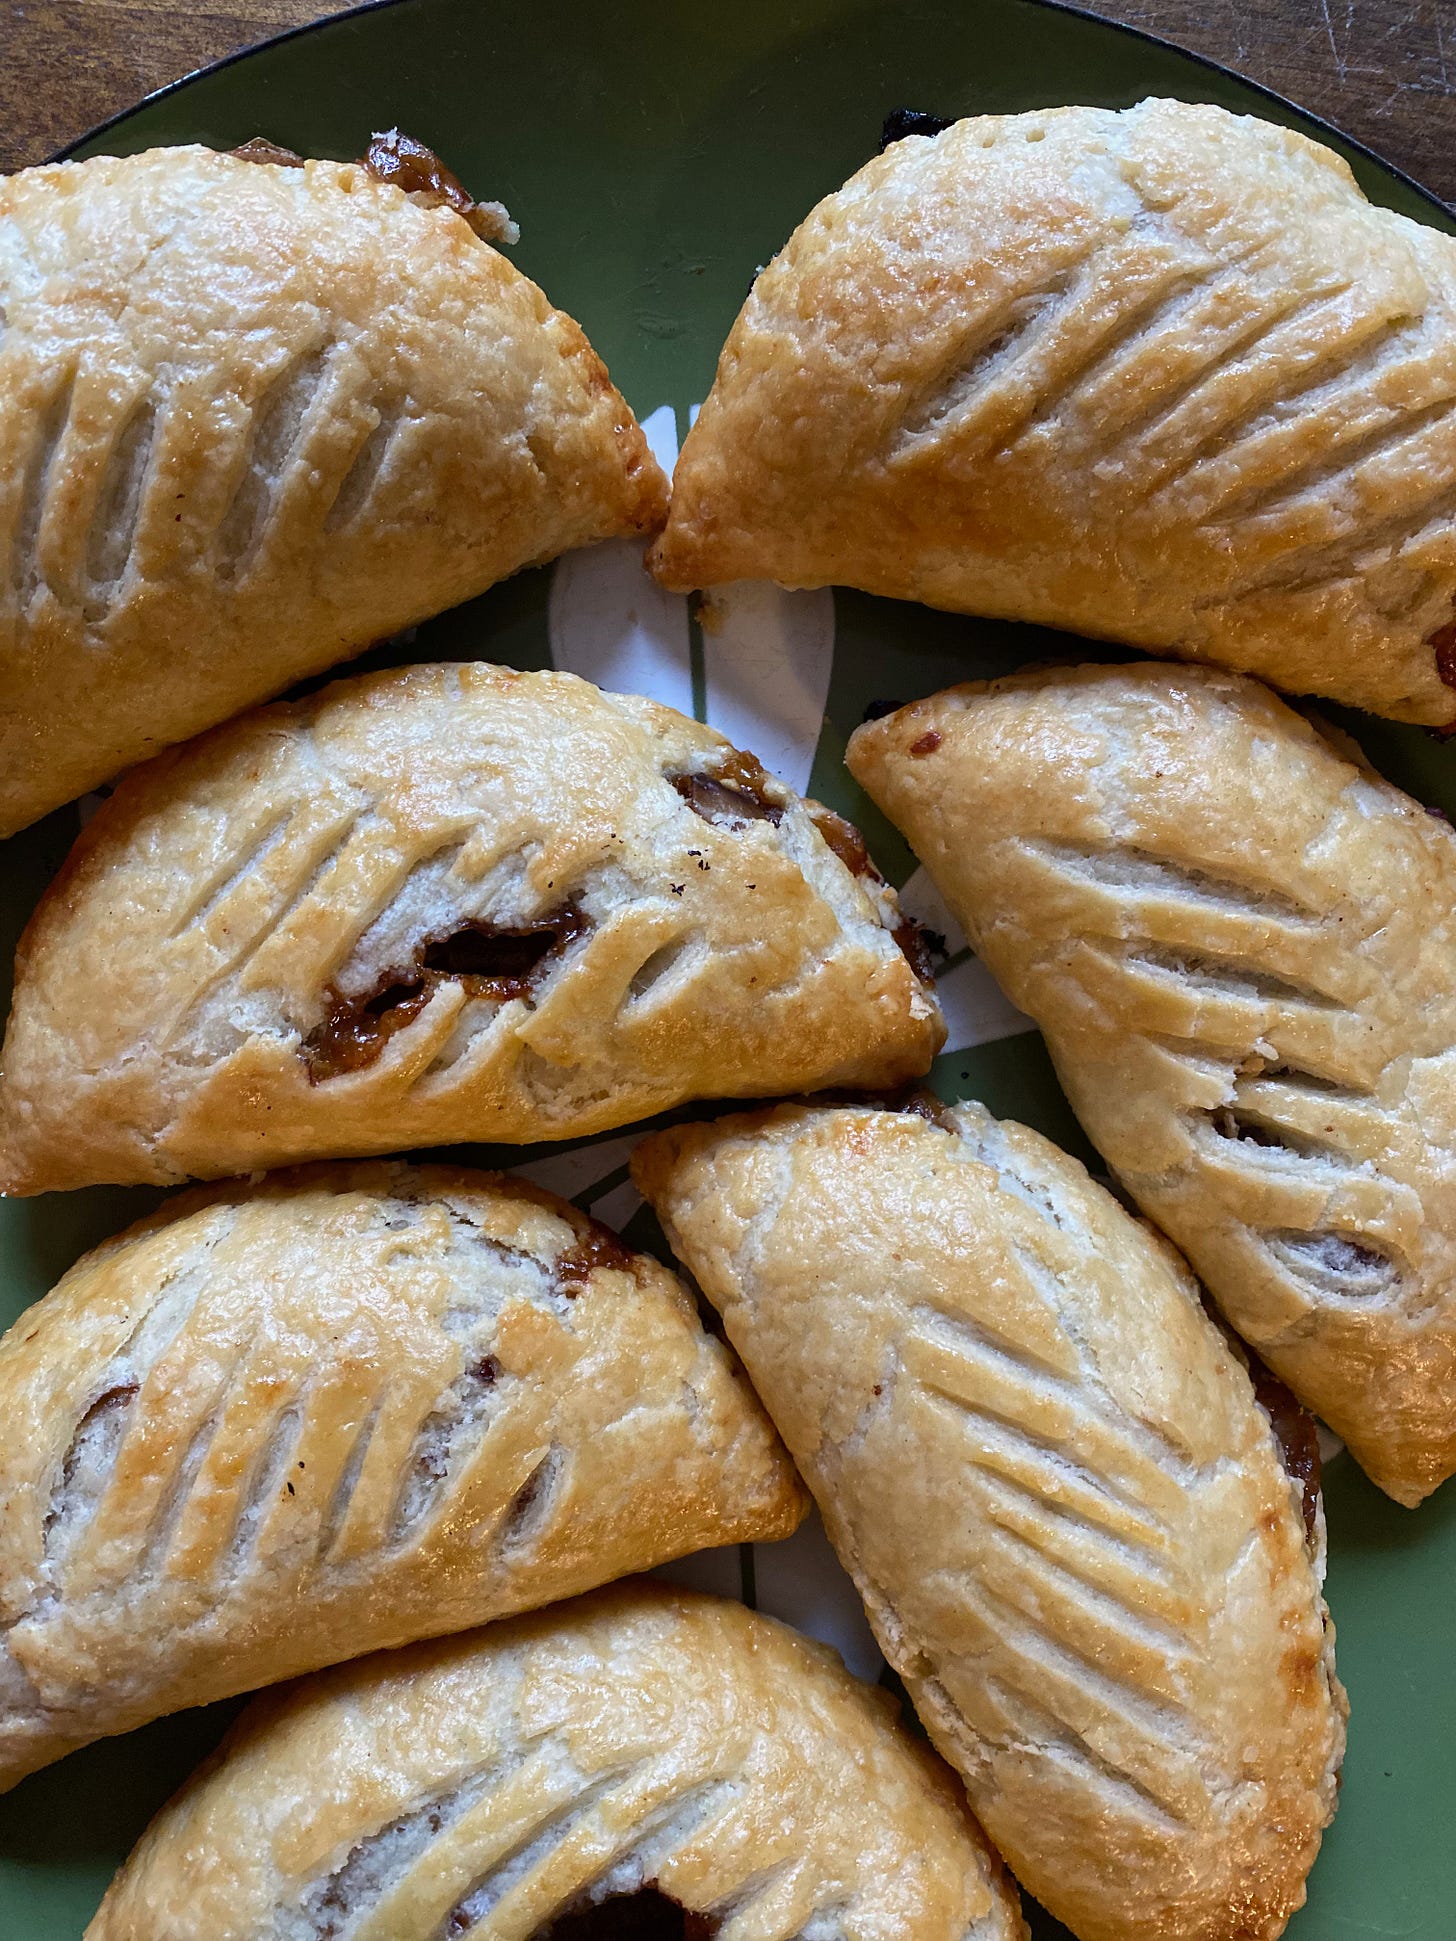 A close up of seven apple-onion turnovers on a green plate. They are half circles, with slashes running across their golden-brown tops. A few of them have burst open, showing the filling inside.